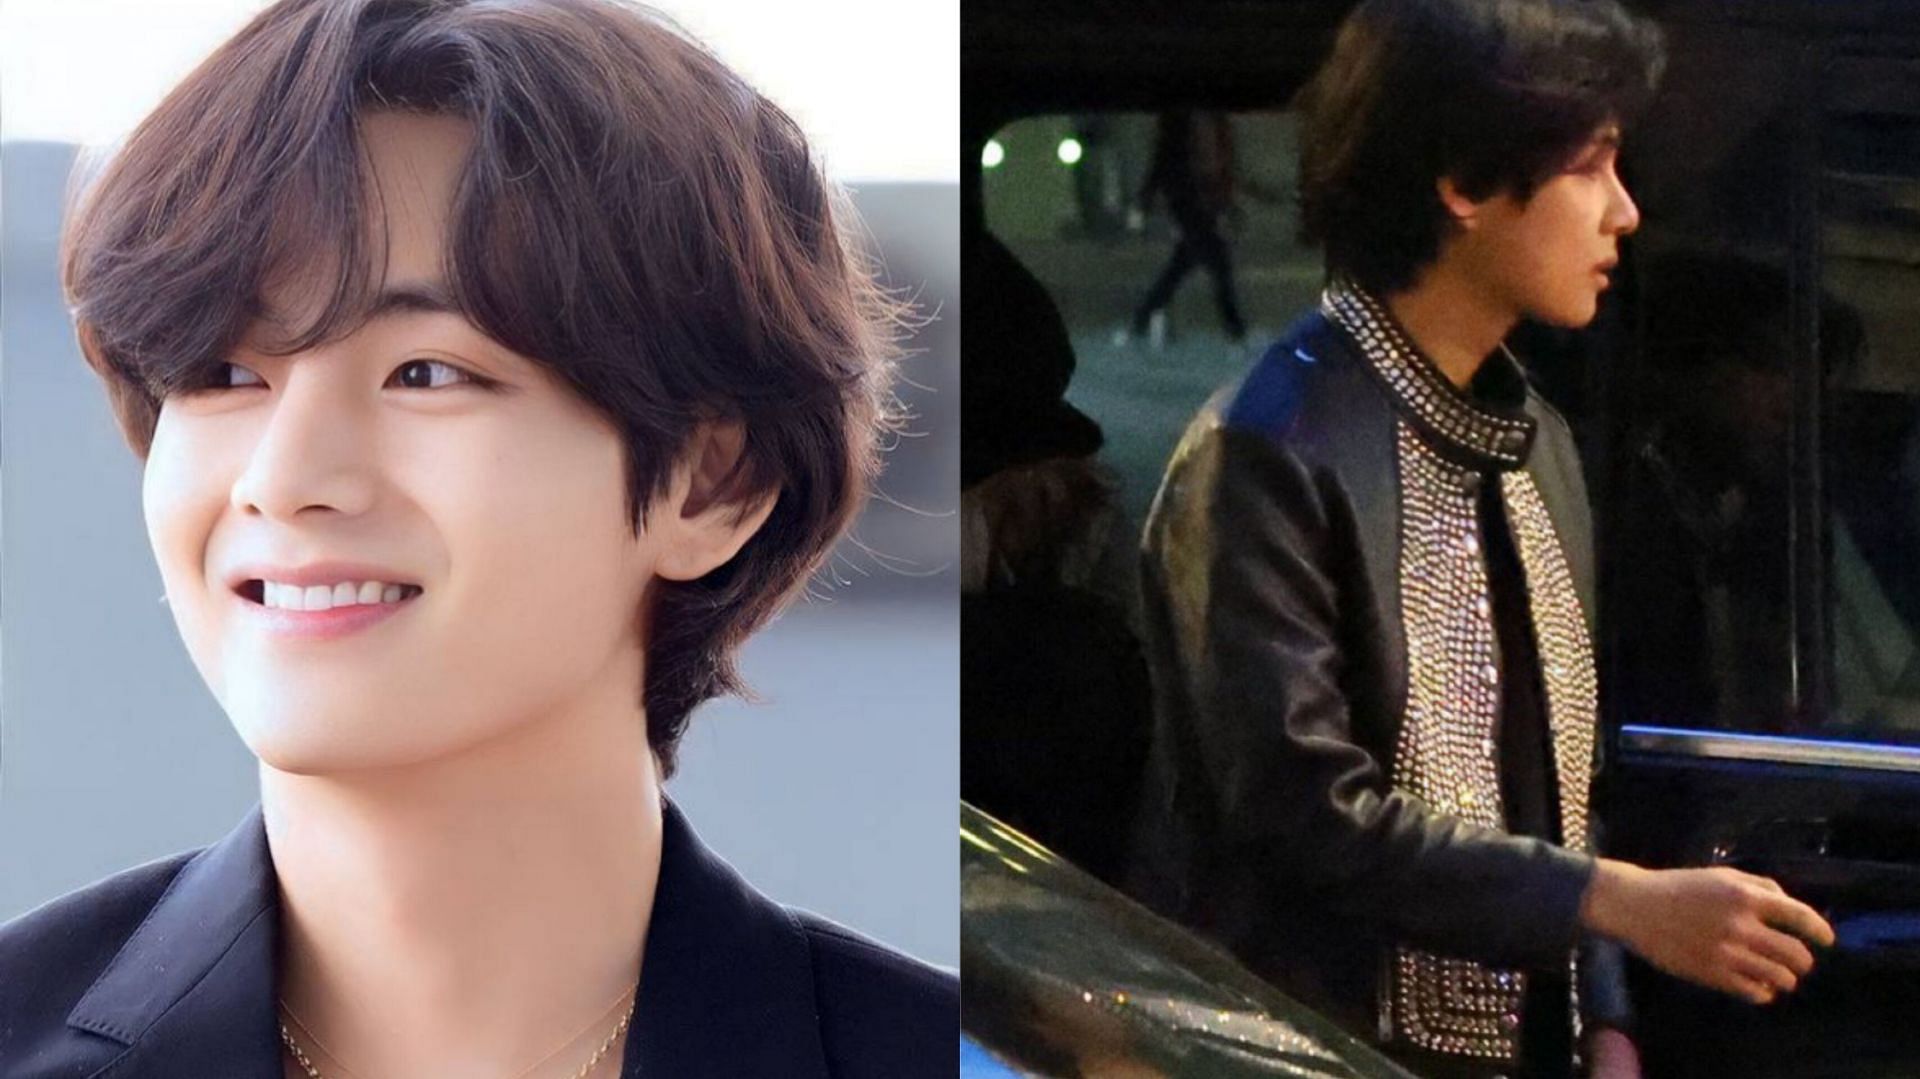 Netizens react to BTS Kim Taehyung's pictures from CELINE's after